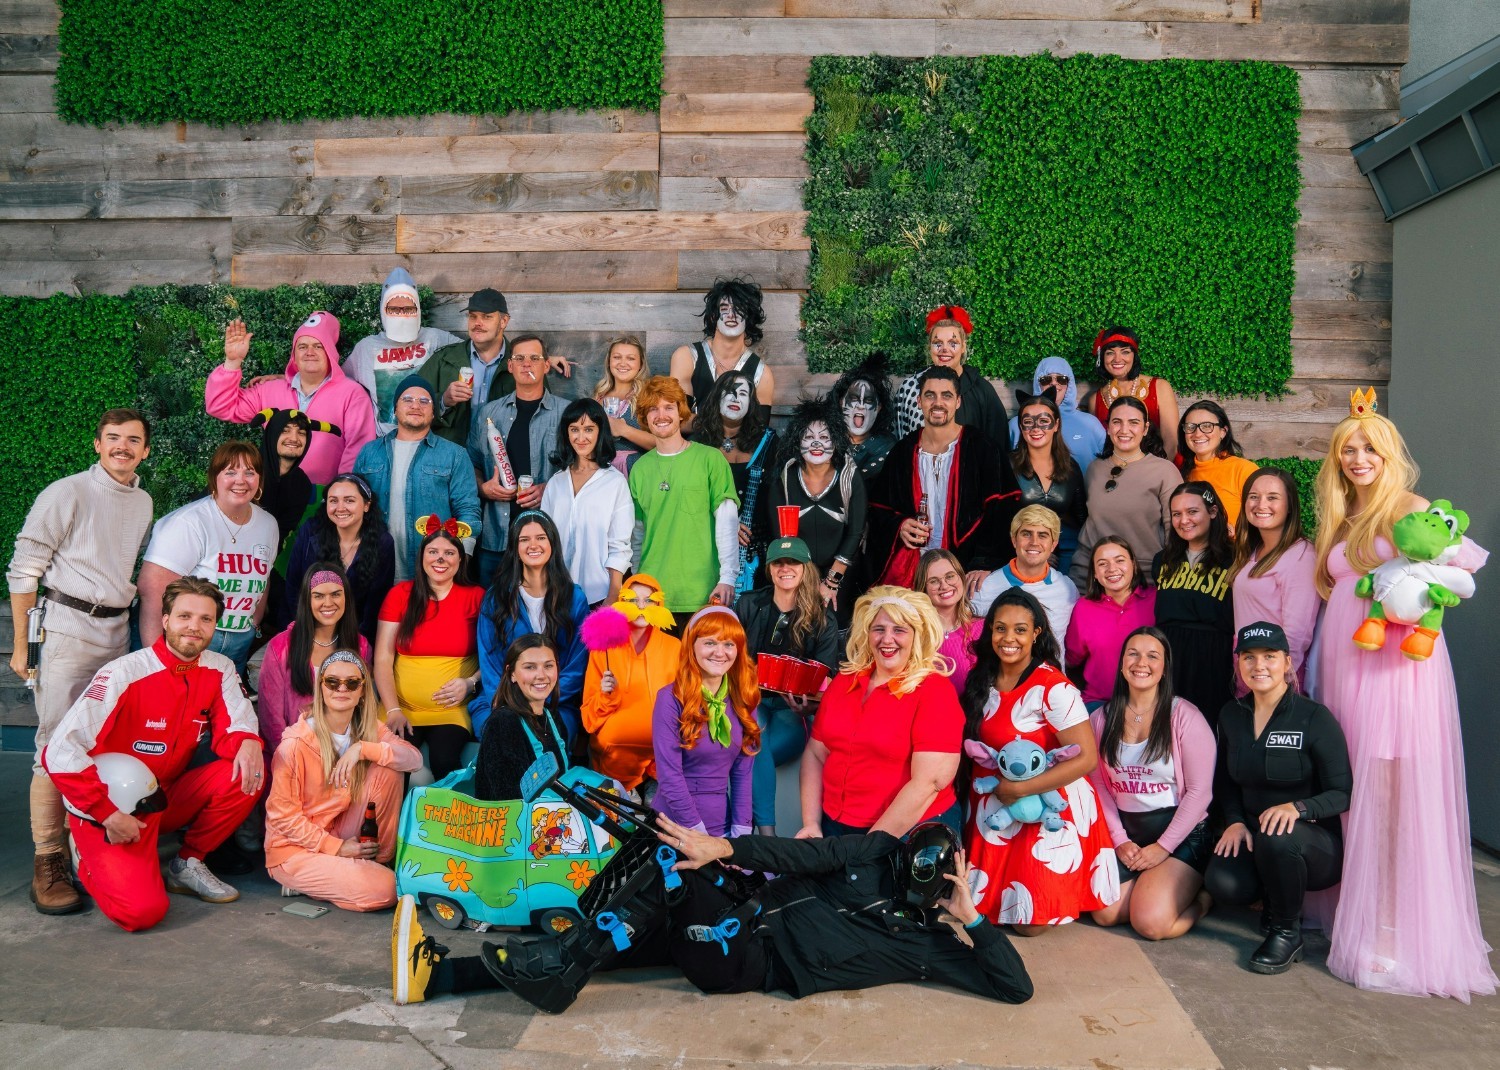 Our team unleashes their creativity at our yearly Halloween celebration, where imaginations run wild!
